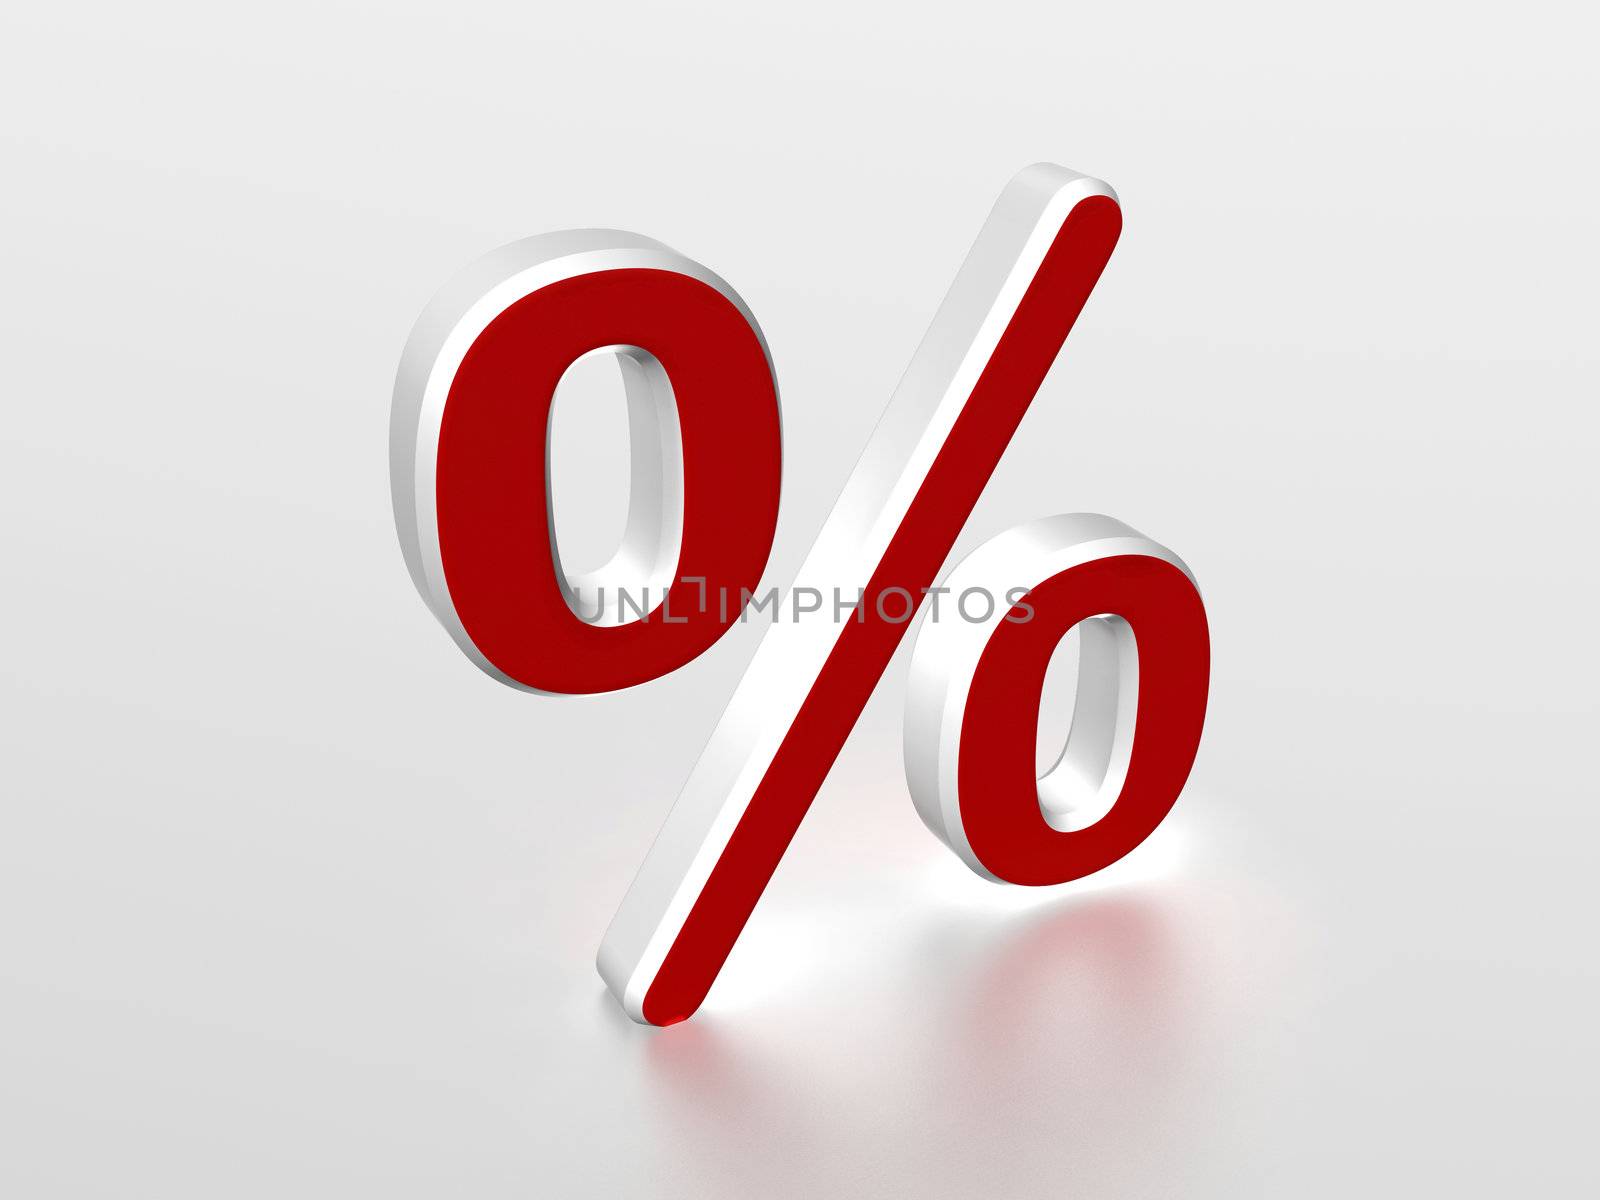 3d rendering of the percentage sign in red and white